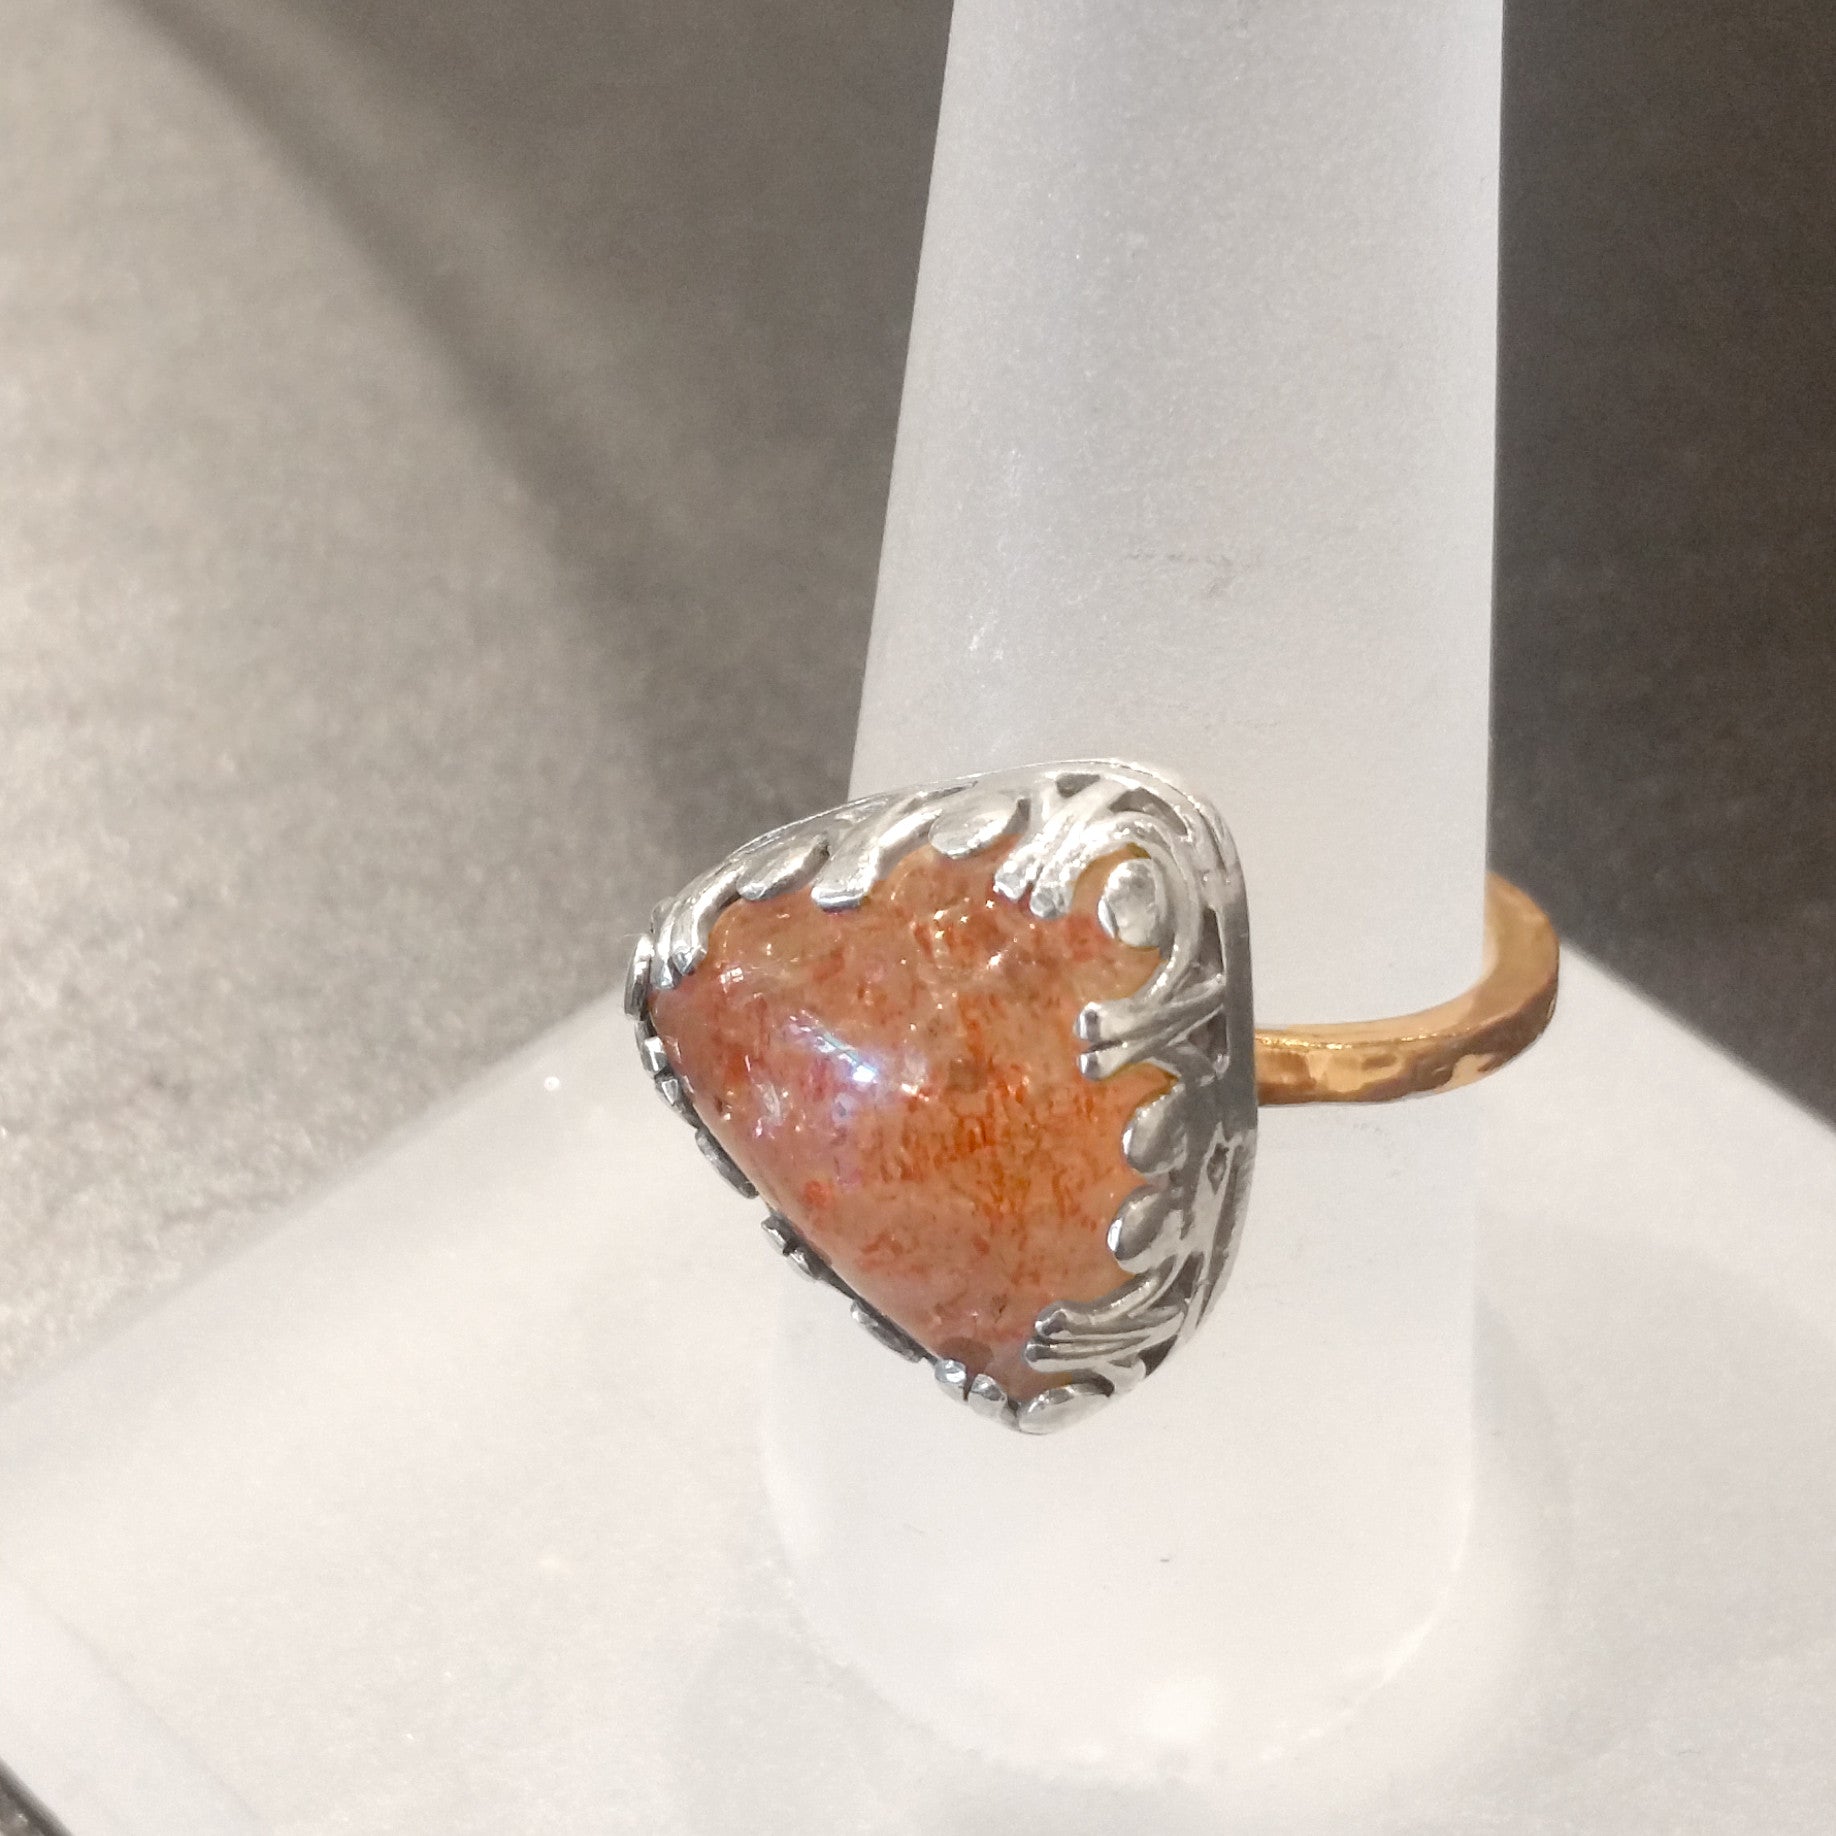 Big Bezel Sunstone Ring , rings - No Roses Earthen, No Roses Jewelry Artisan Jewelry Los Angeles - 1